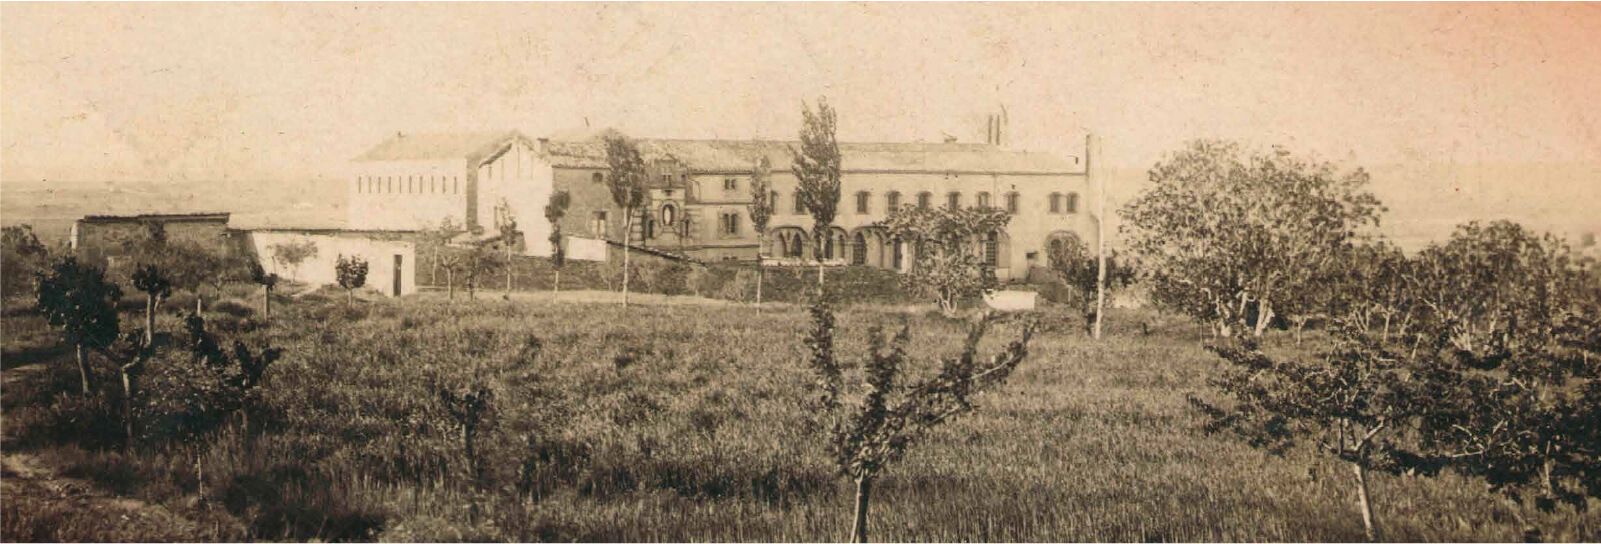 Photo of old building of Colom